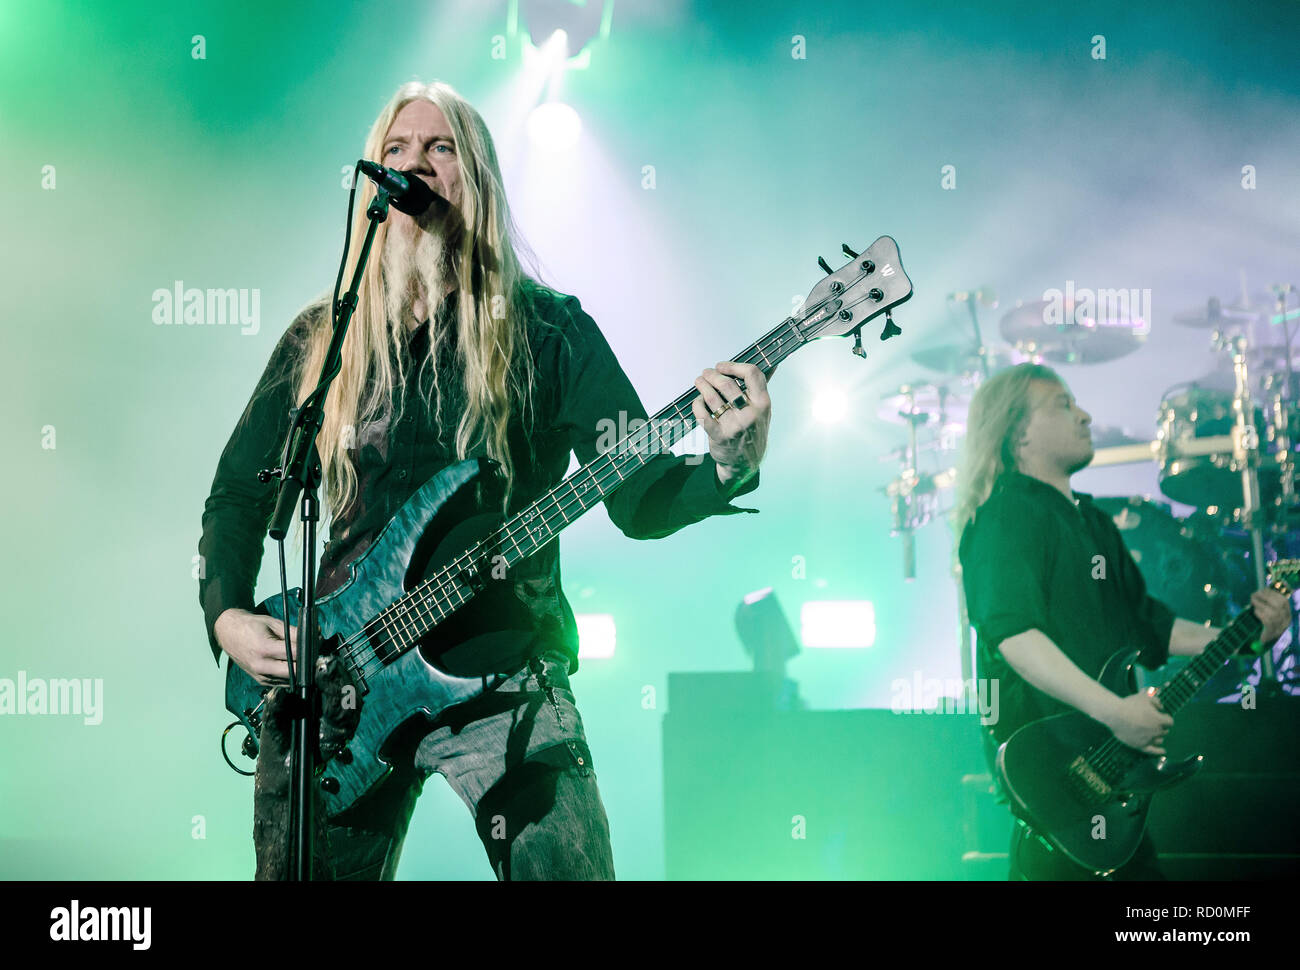 Nightwish, the Finnish symphonic metal band, performs a live concert at Falconer Salen in Copenhagen. Here musician Marco Hietala on bass is seen live on stage. Denmark, 16/11 2015. EXCLUDING DENMARK. Stock Photo